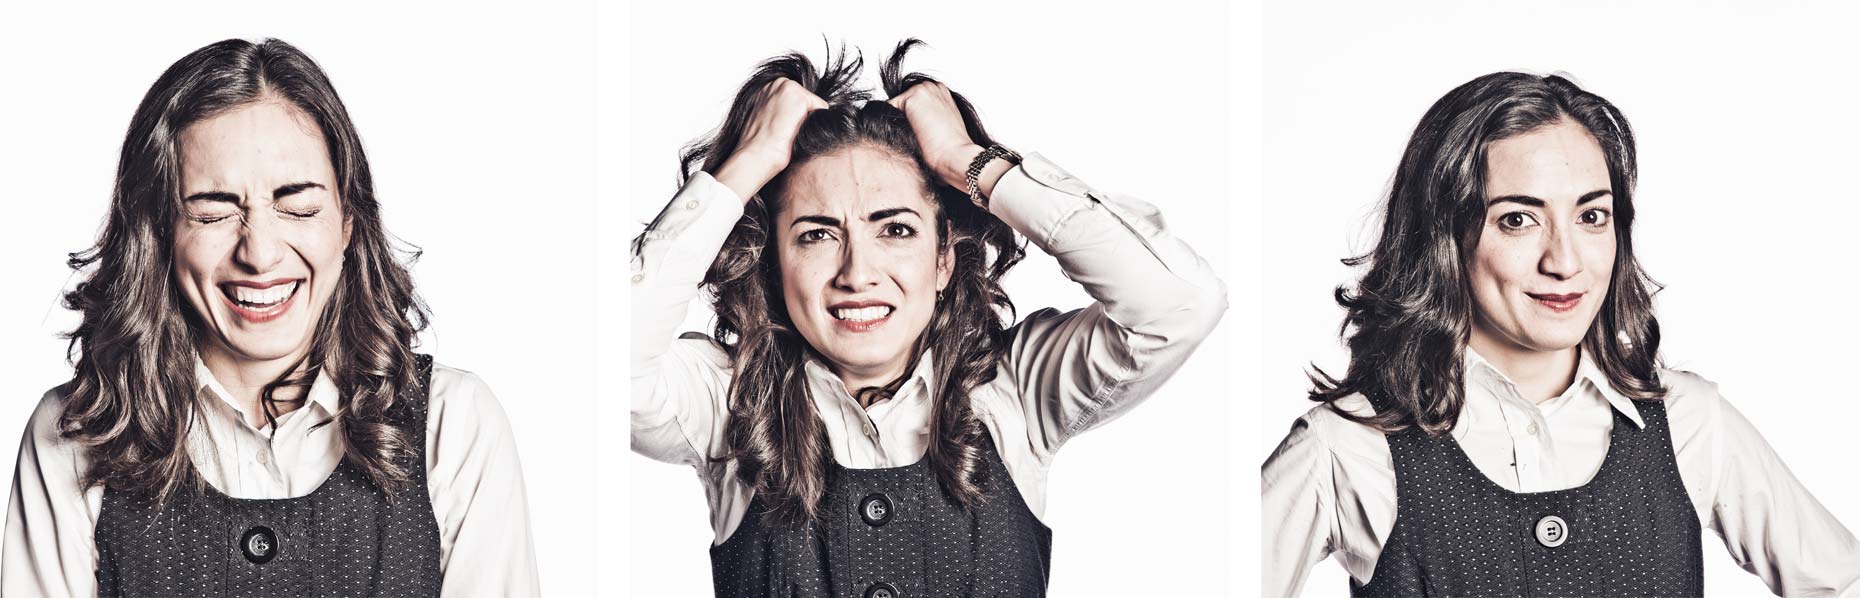 Expressive young woman tearing her hair